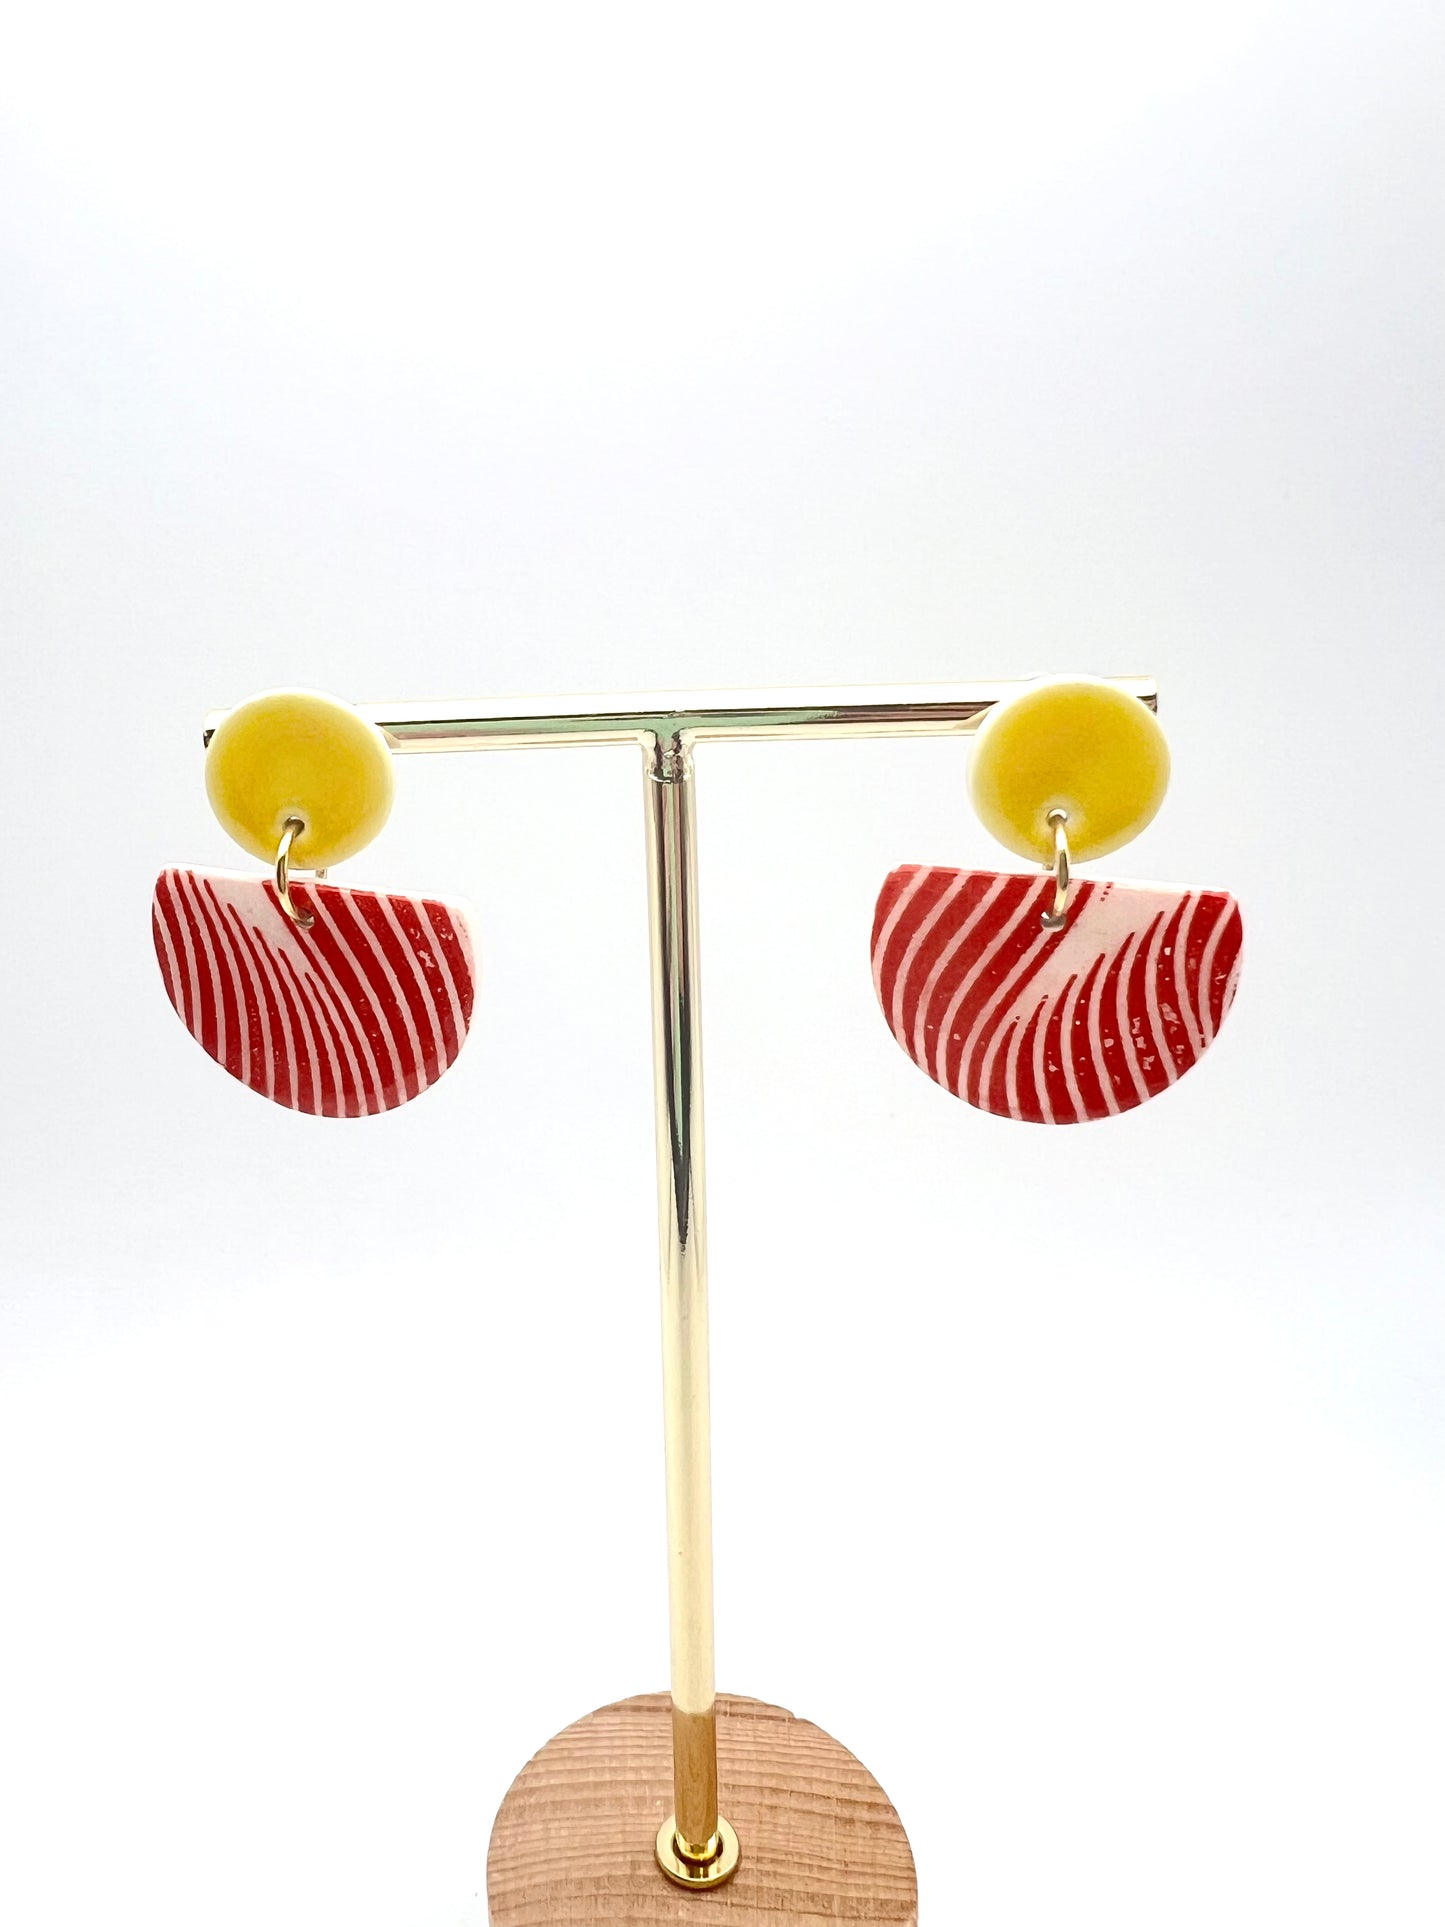 Cré Drop Earring - Red Wavy Print & Canary Yellow